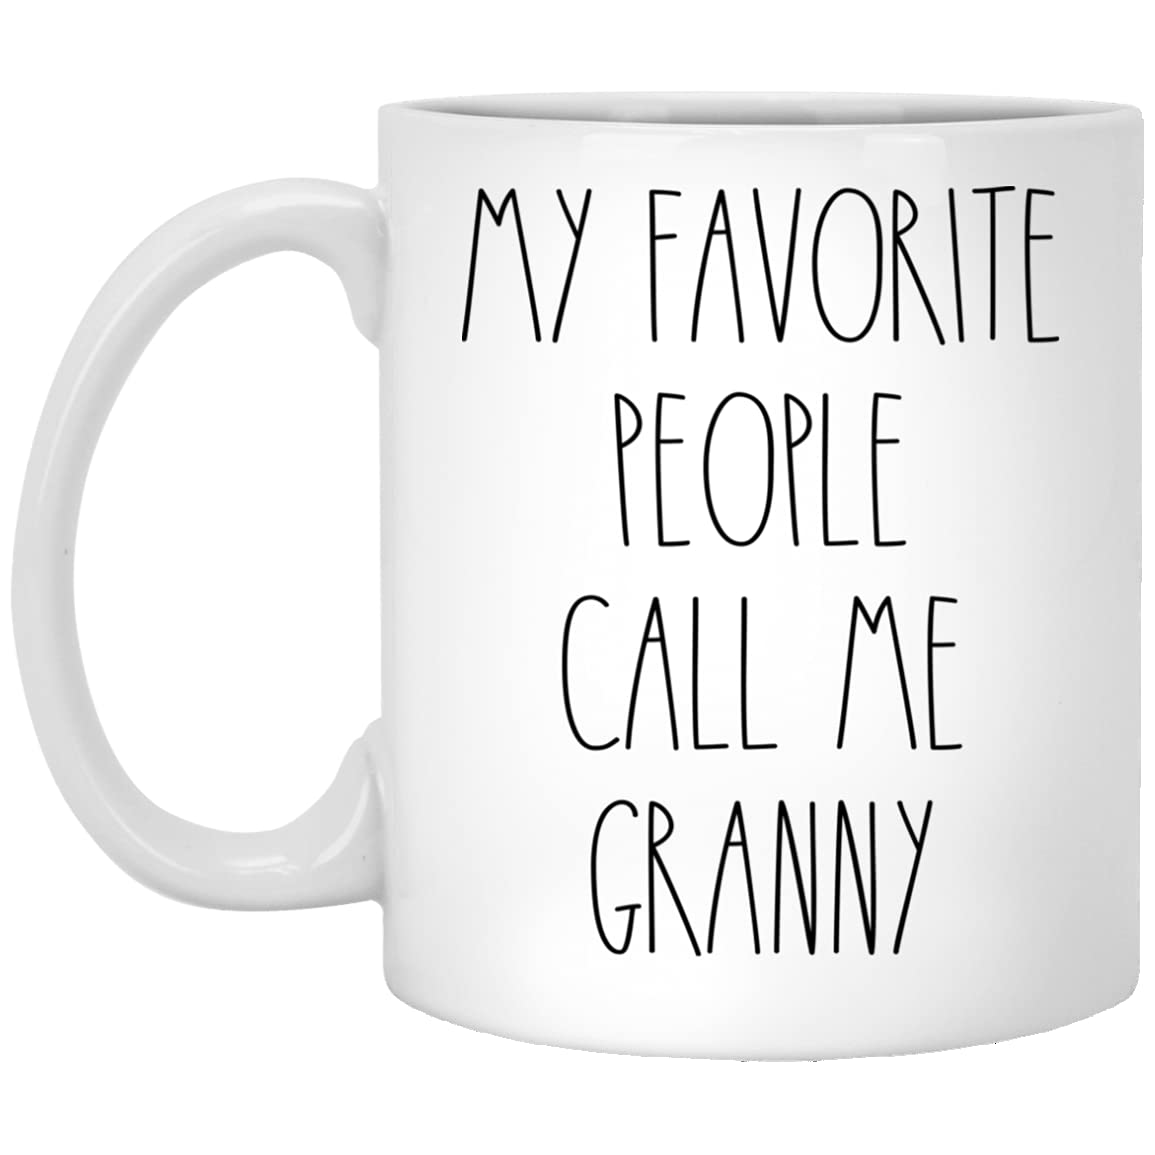 PTDShops Granny - My Favorite People Call Me Granny Coffee Mug, Granny Rae Dunn Inspired, Rae Dunn Style, Birthday - Merry Christmas - Mother's Day, Granny Coffee Cup 11oz, White